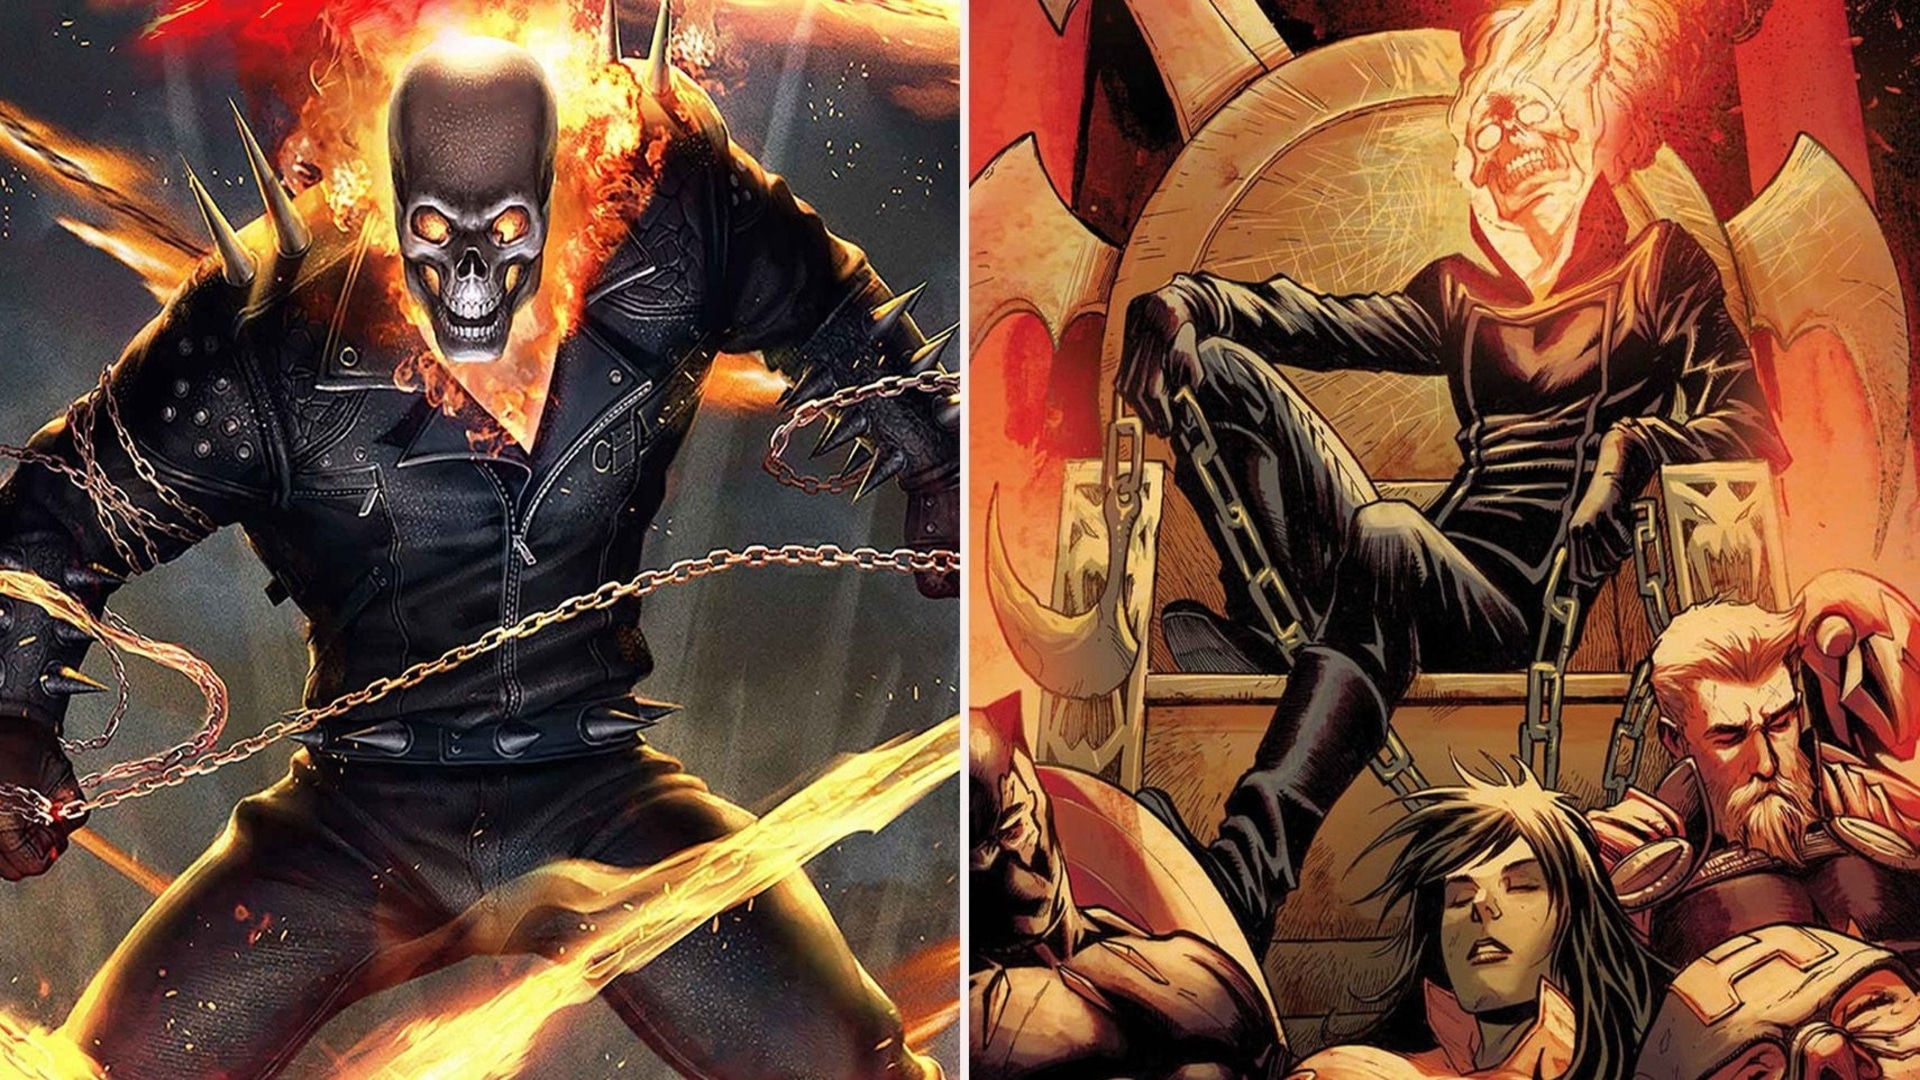 Ghost Rider is likely to be part of Marvel:Crisis Protocol 